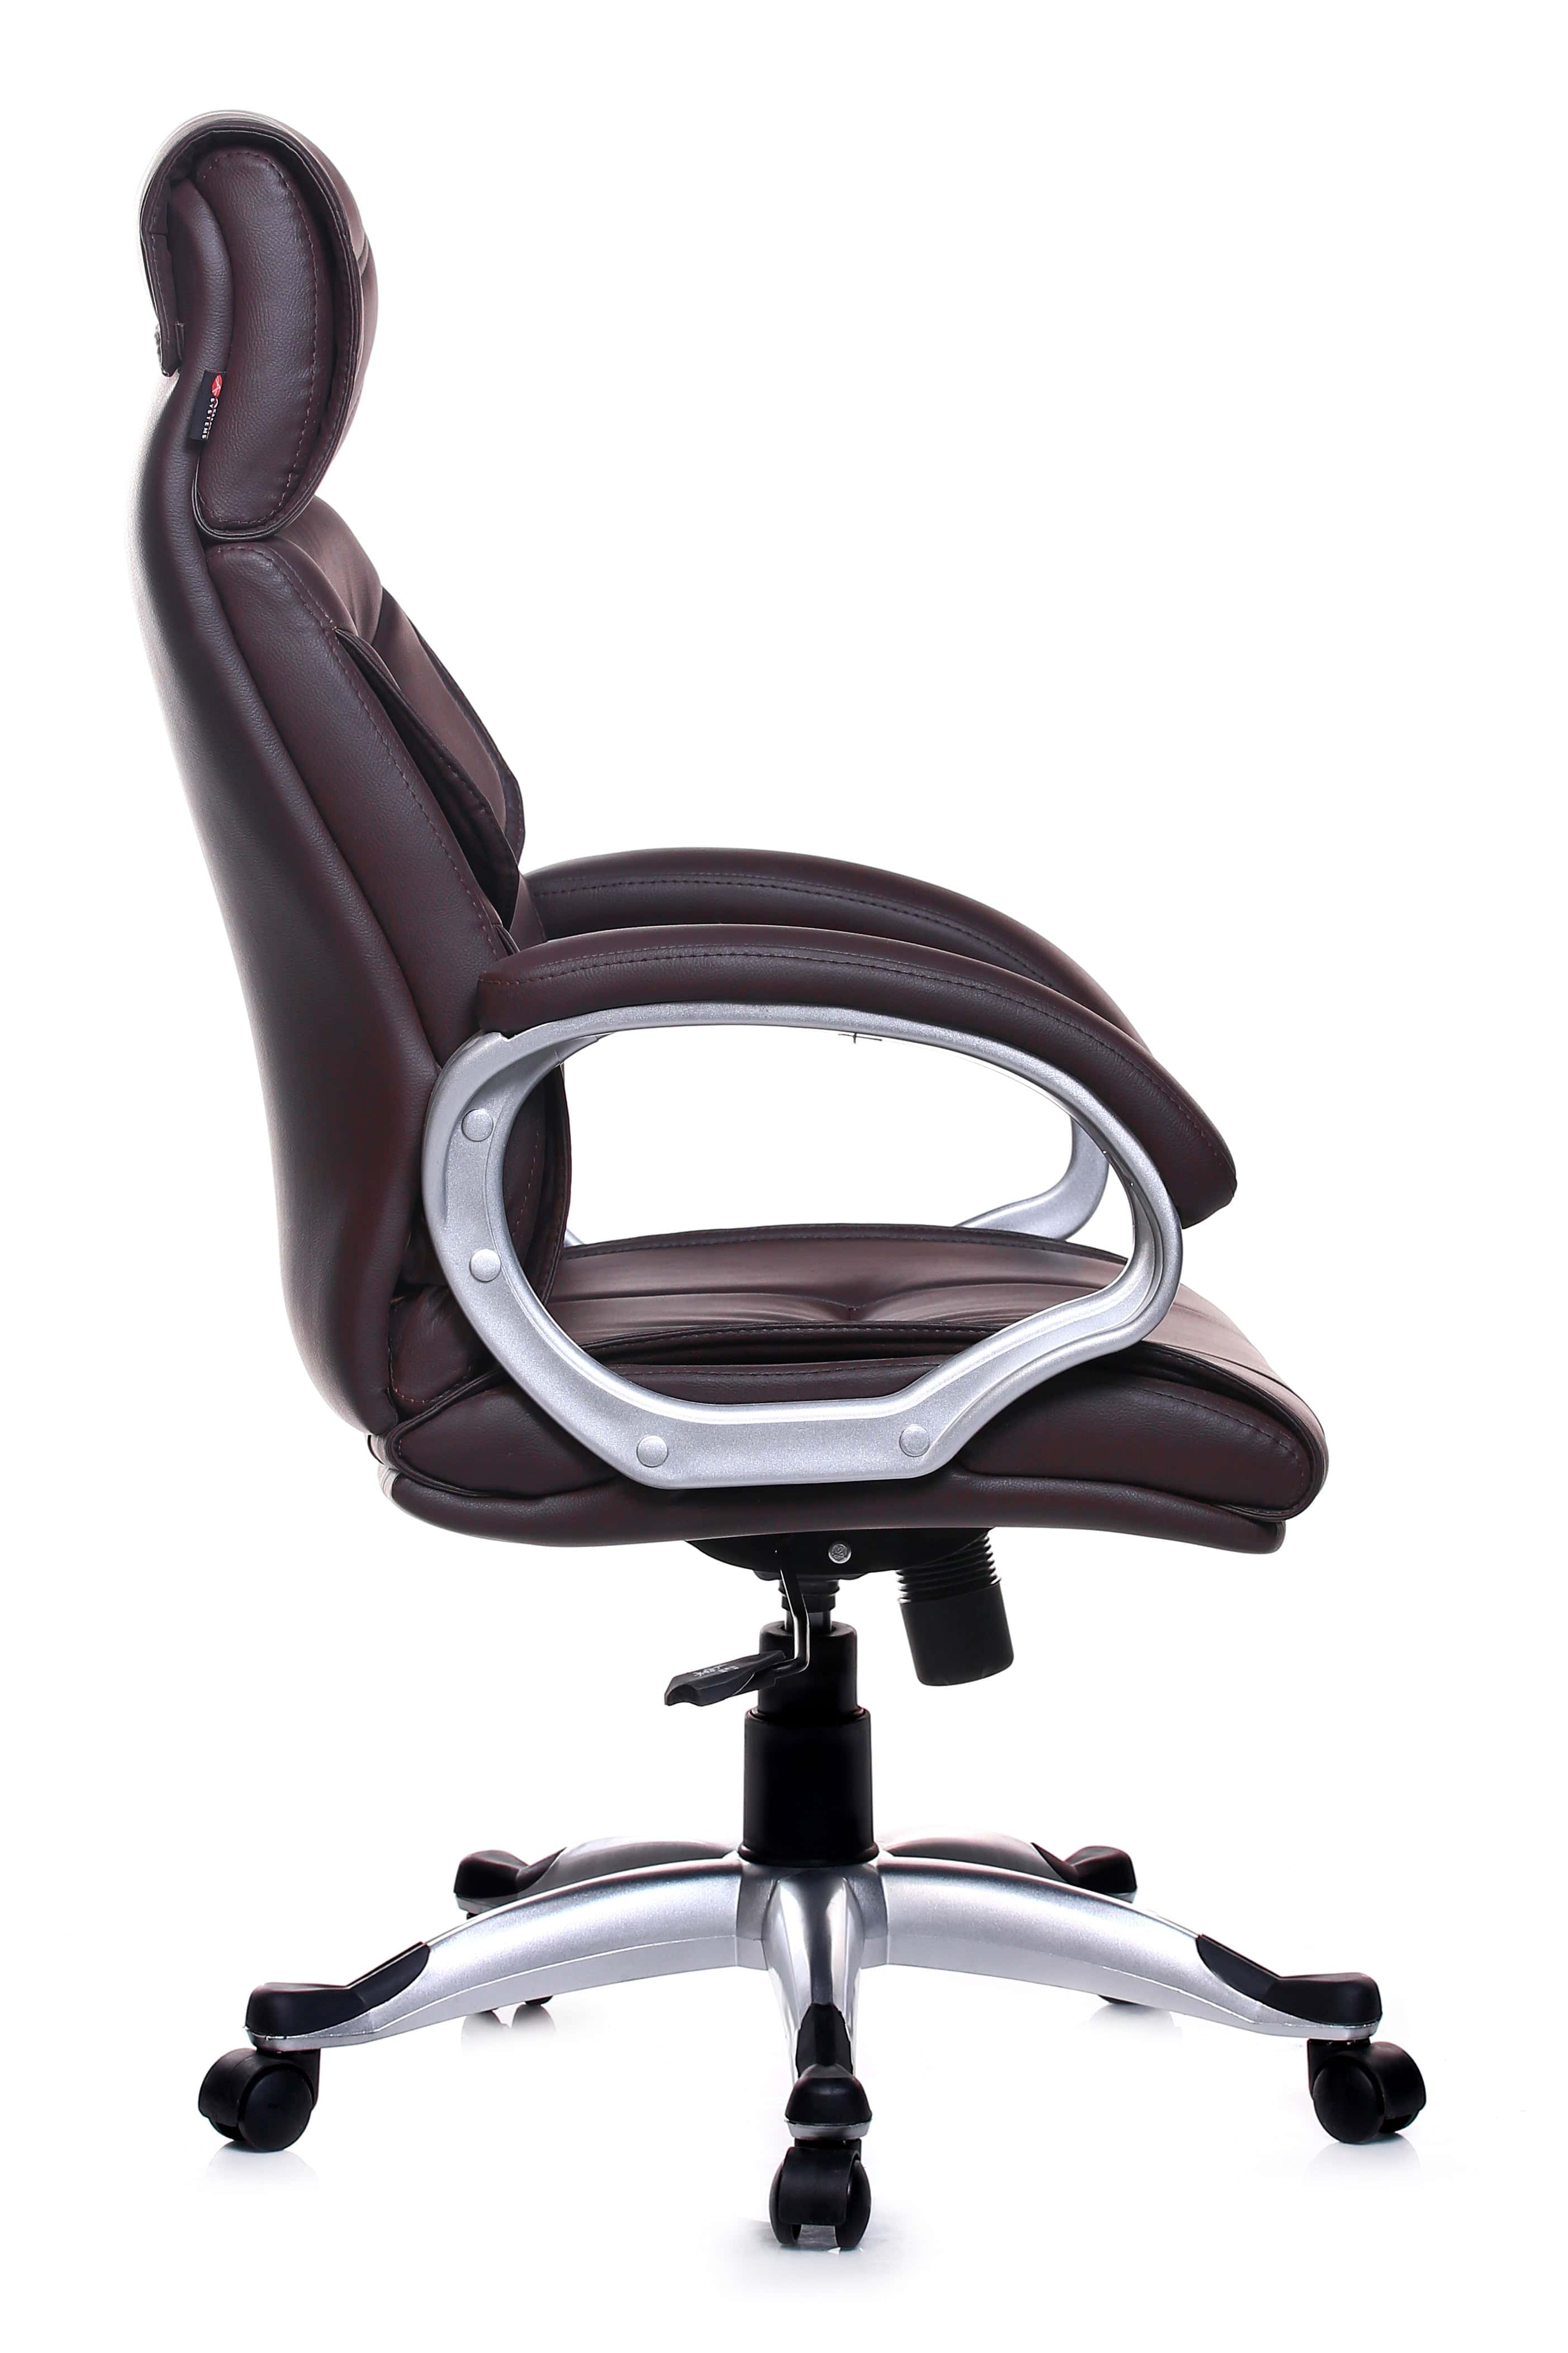 Stylish Executive Chair in Brown Colour by Adiko Systems